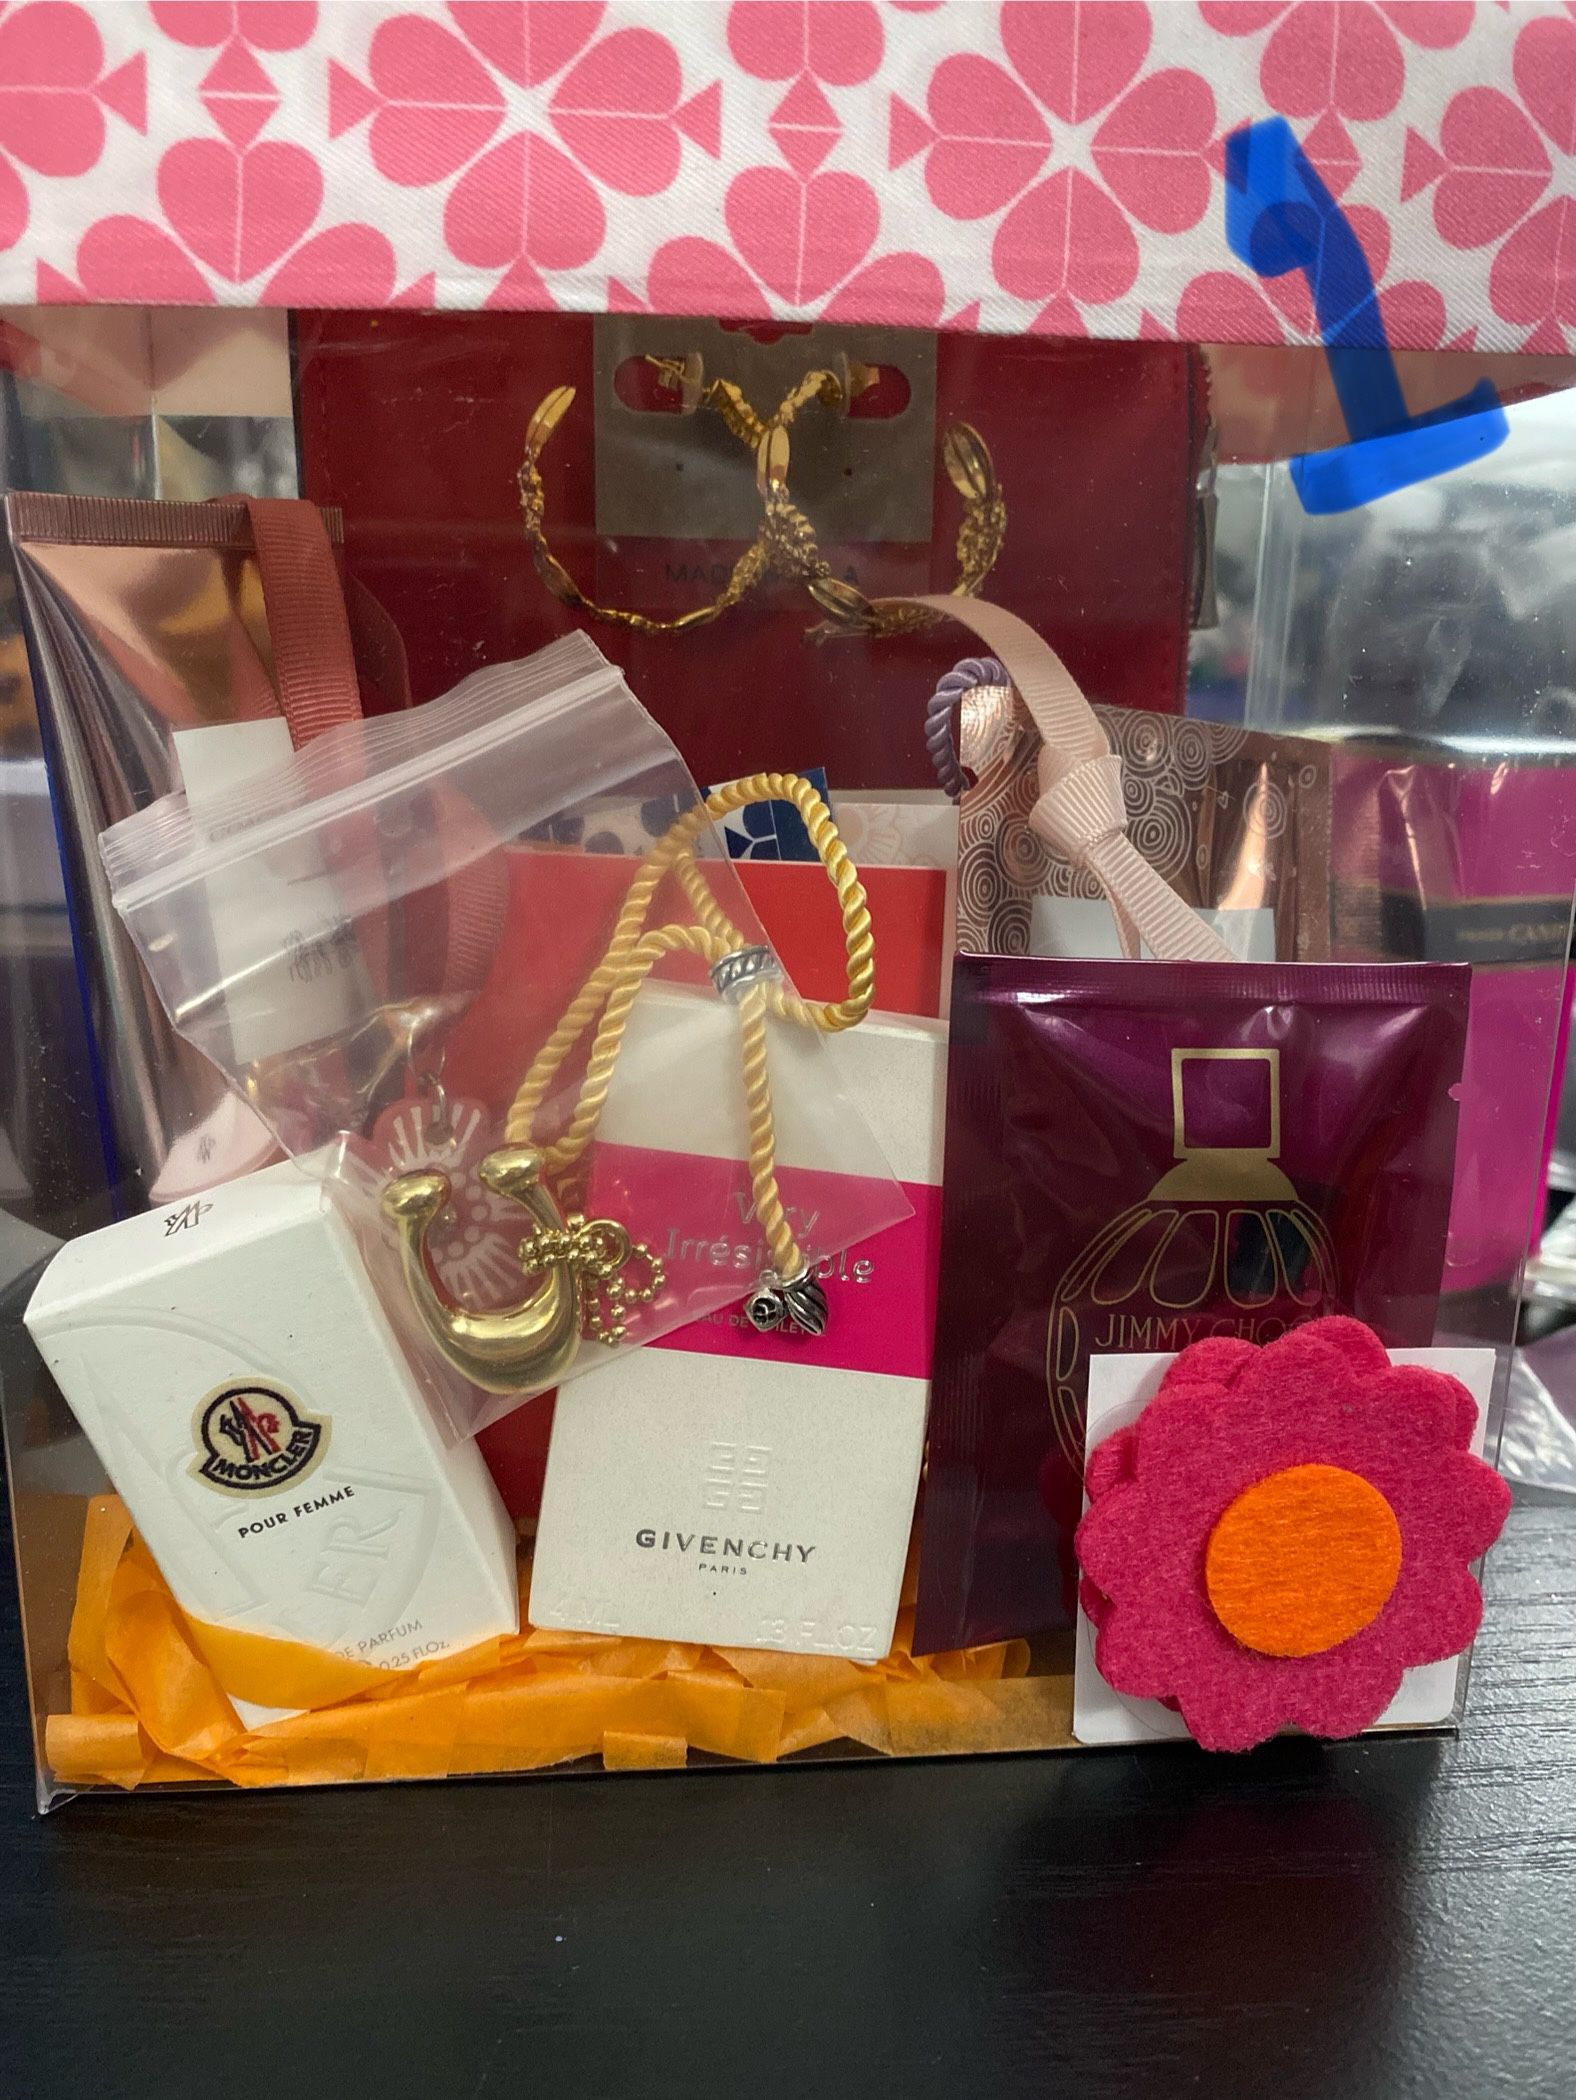 Fragrance Goodie Box Gifts - Perfume Samples, Minis, Jewelry - 3 Available!